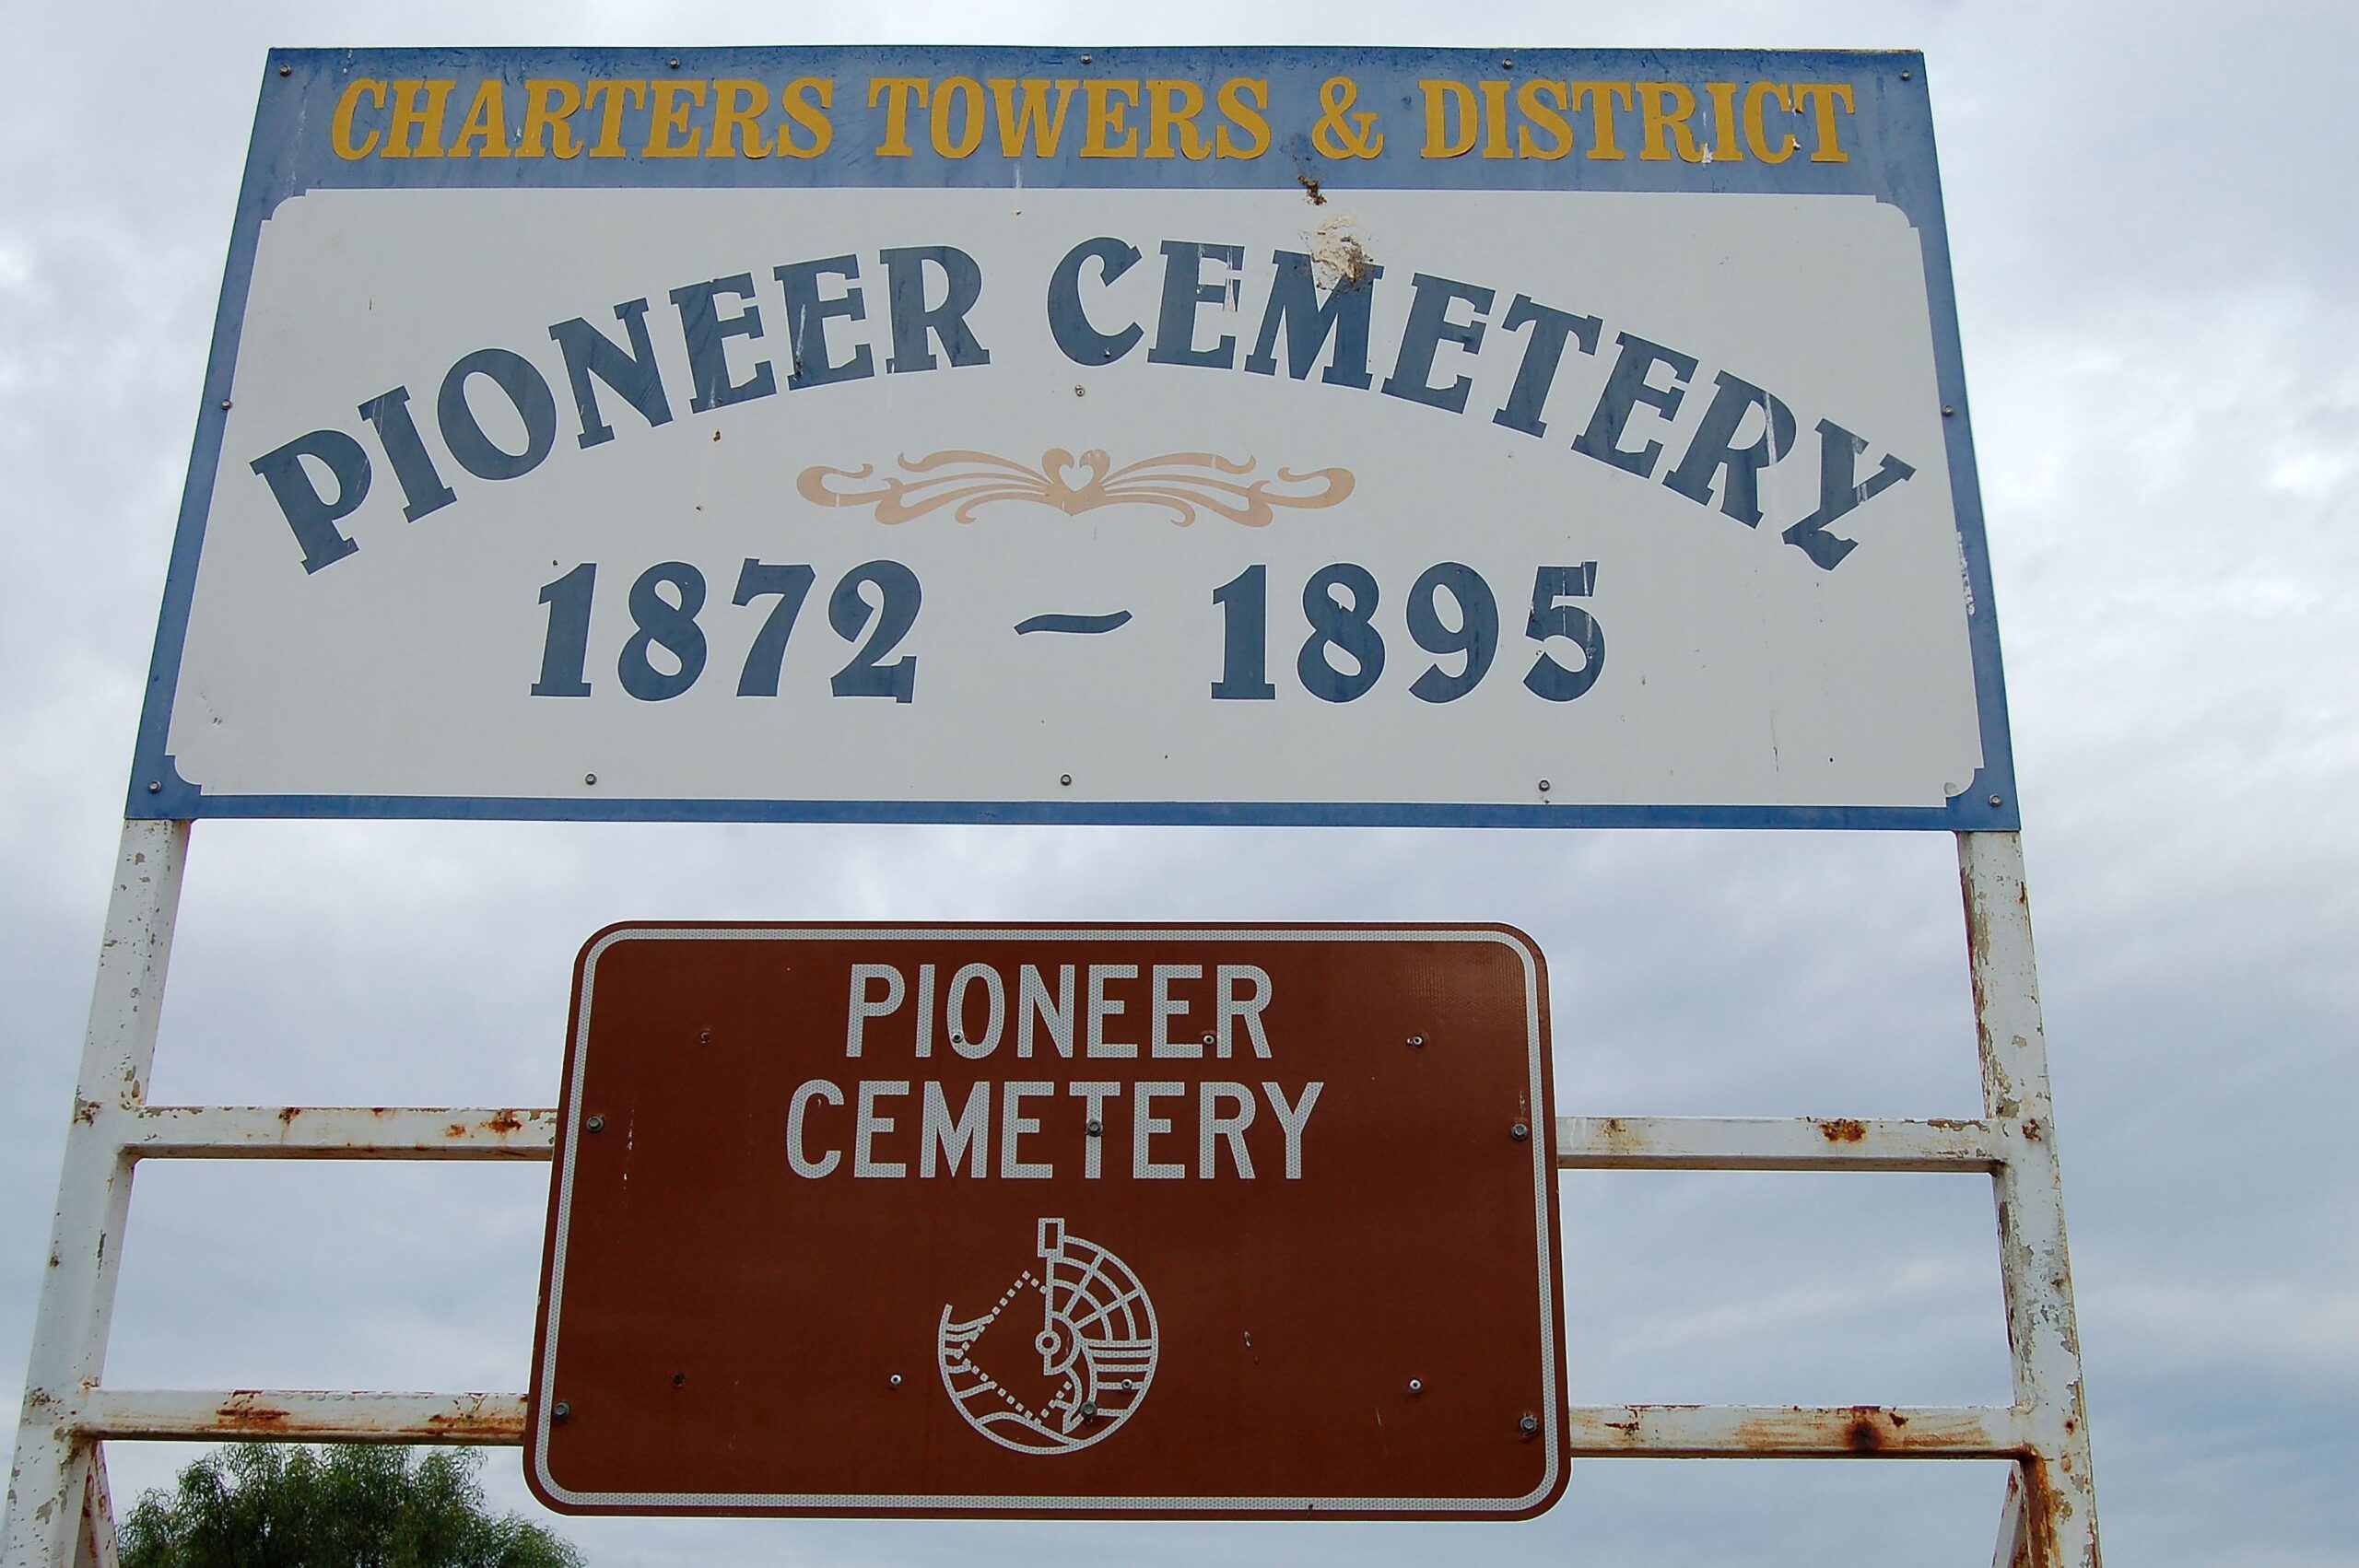 Charters Towers & District Pioneer Cemetery. Source: Photograph by Patricia Taylor, 2019, Find a Grave website.